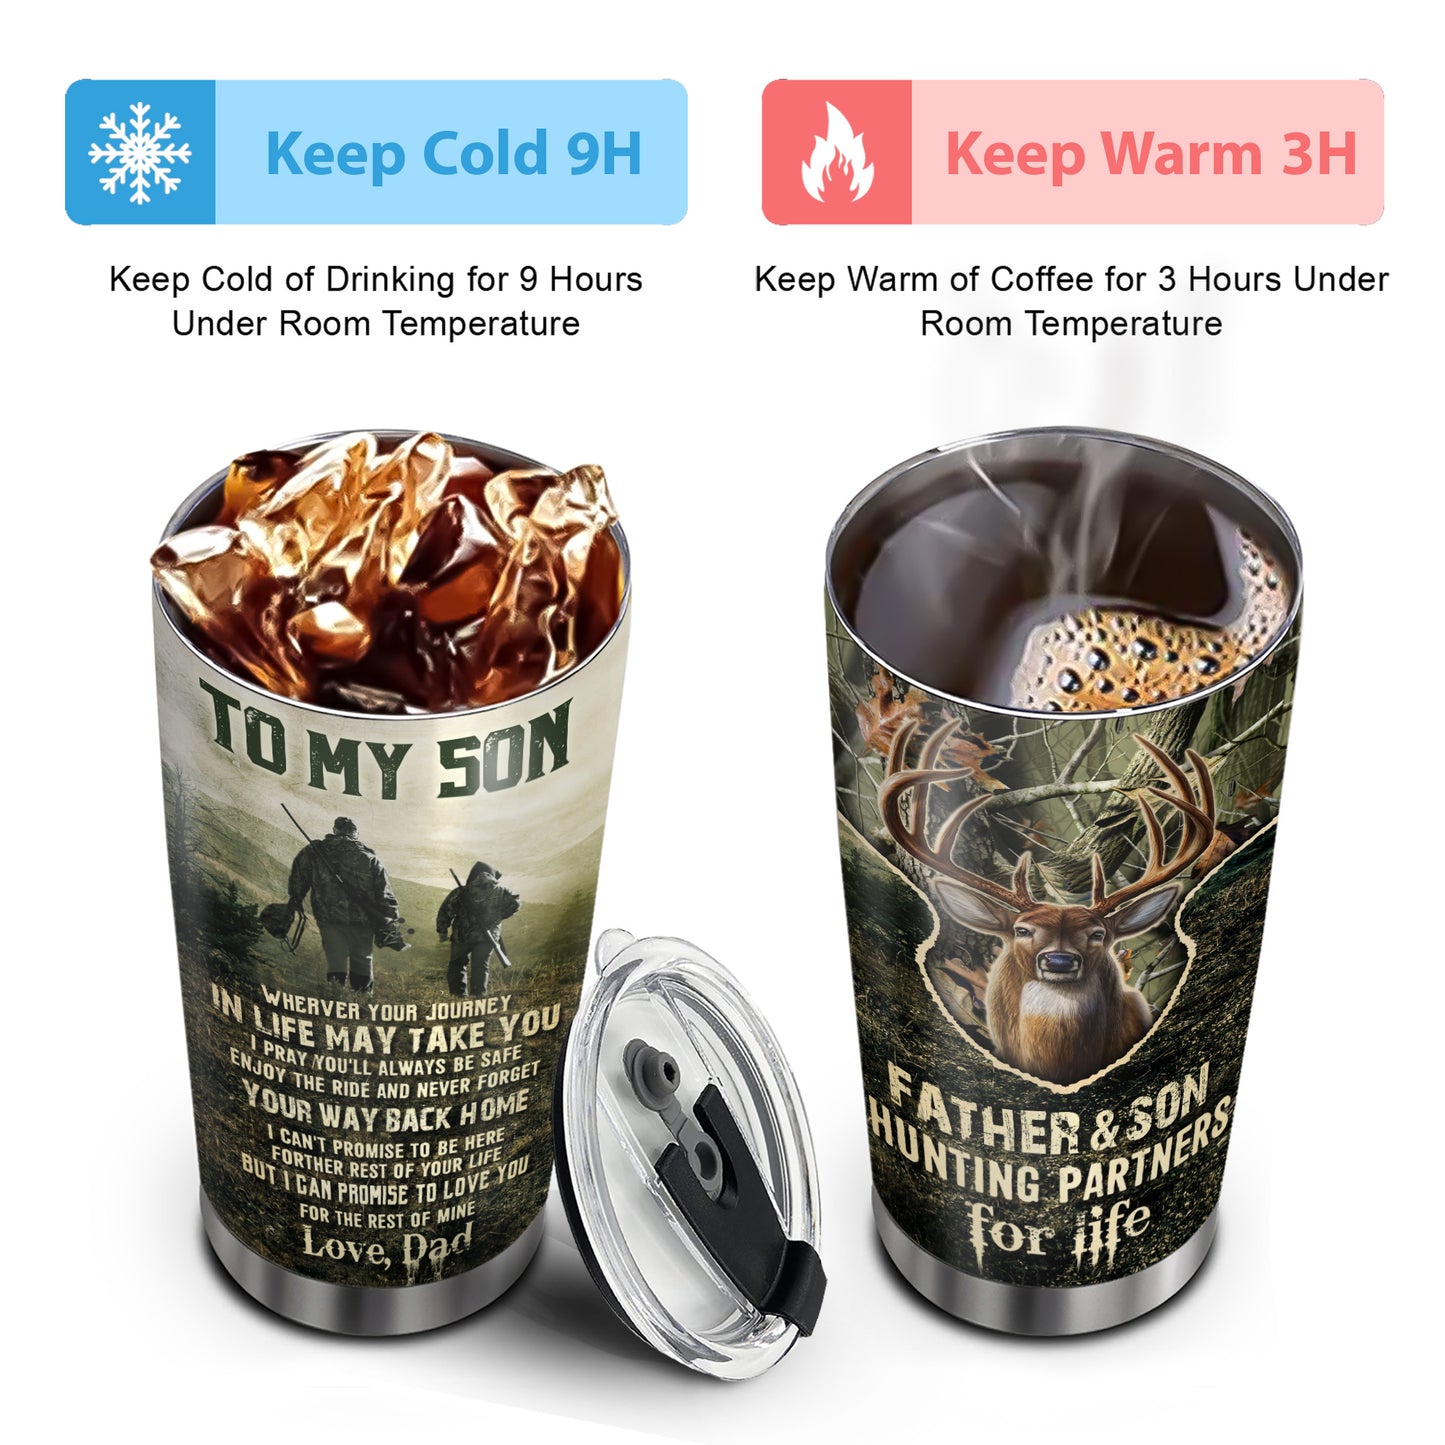 Hunting Father & Son Wherever Your Journey 20Oz Tumbler